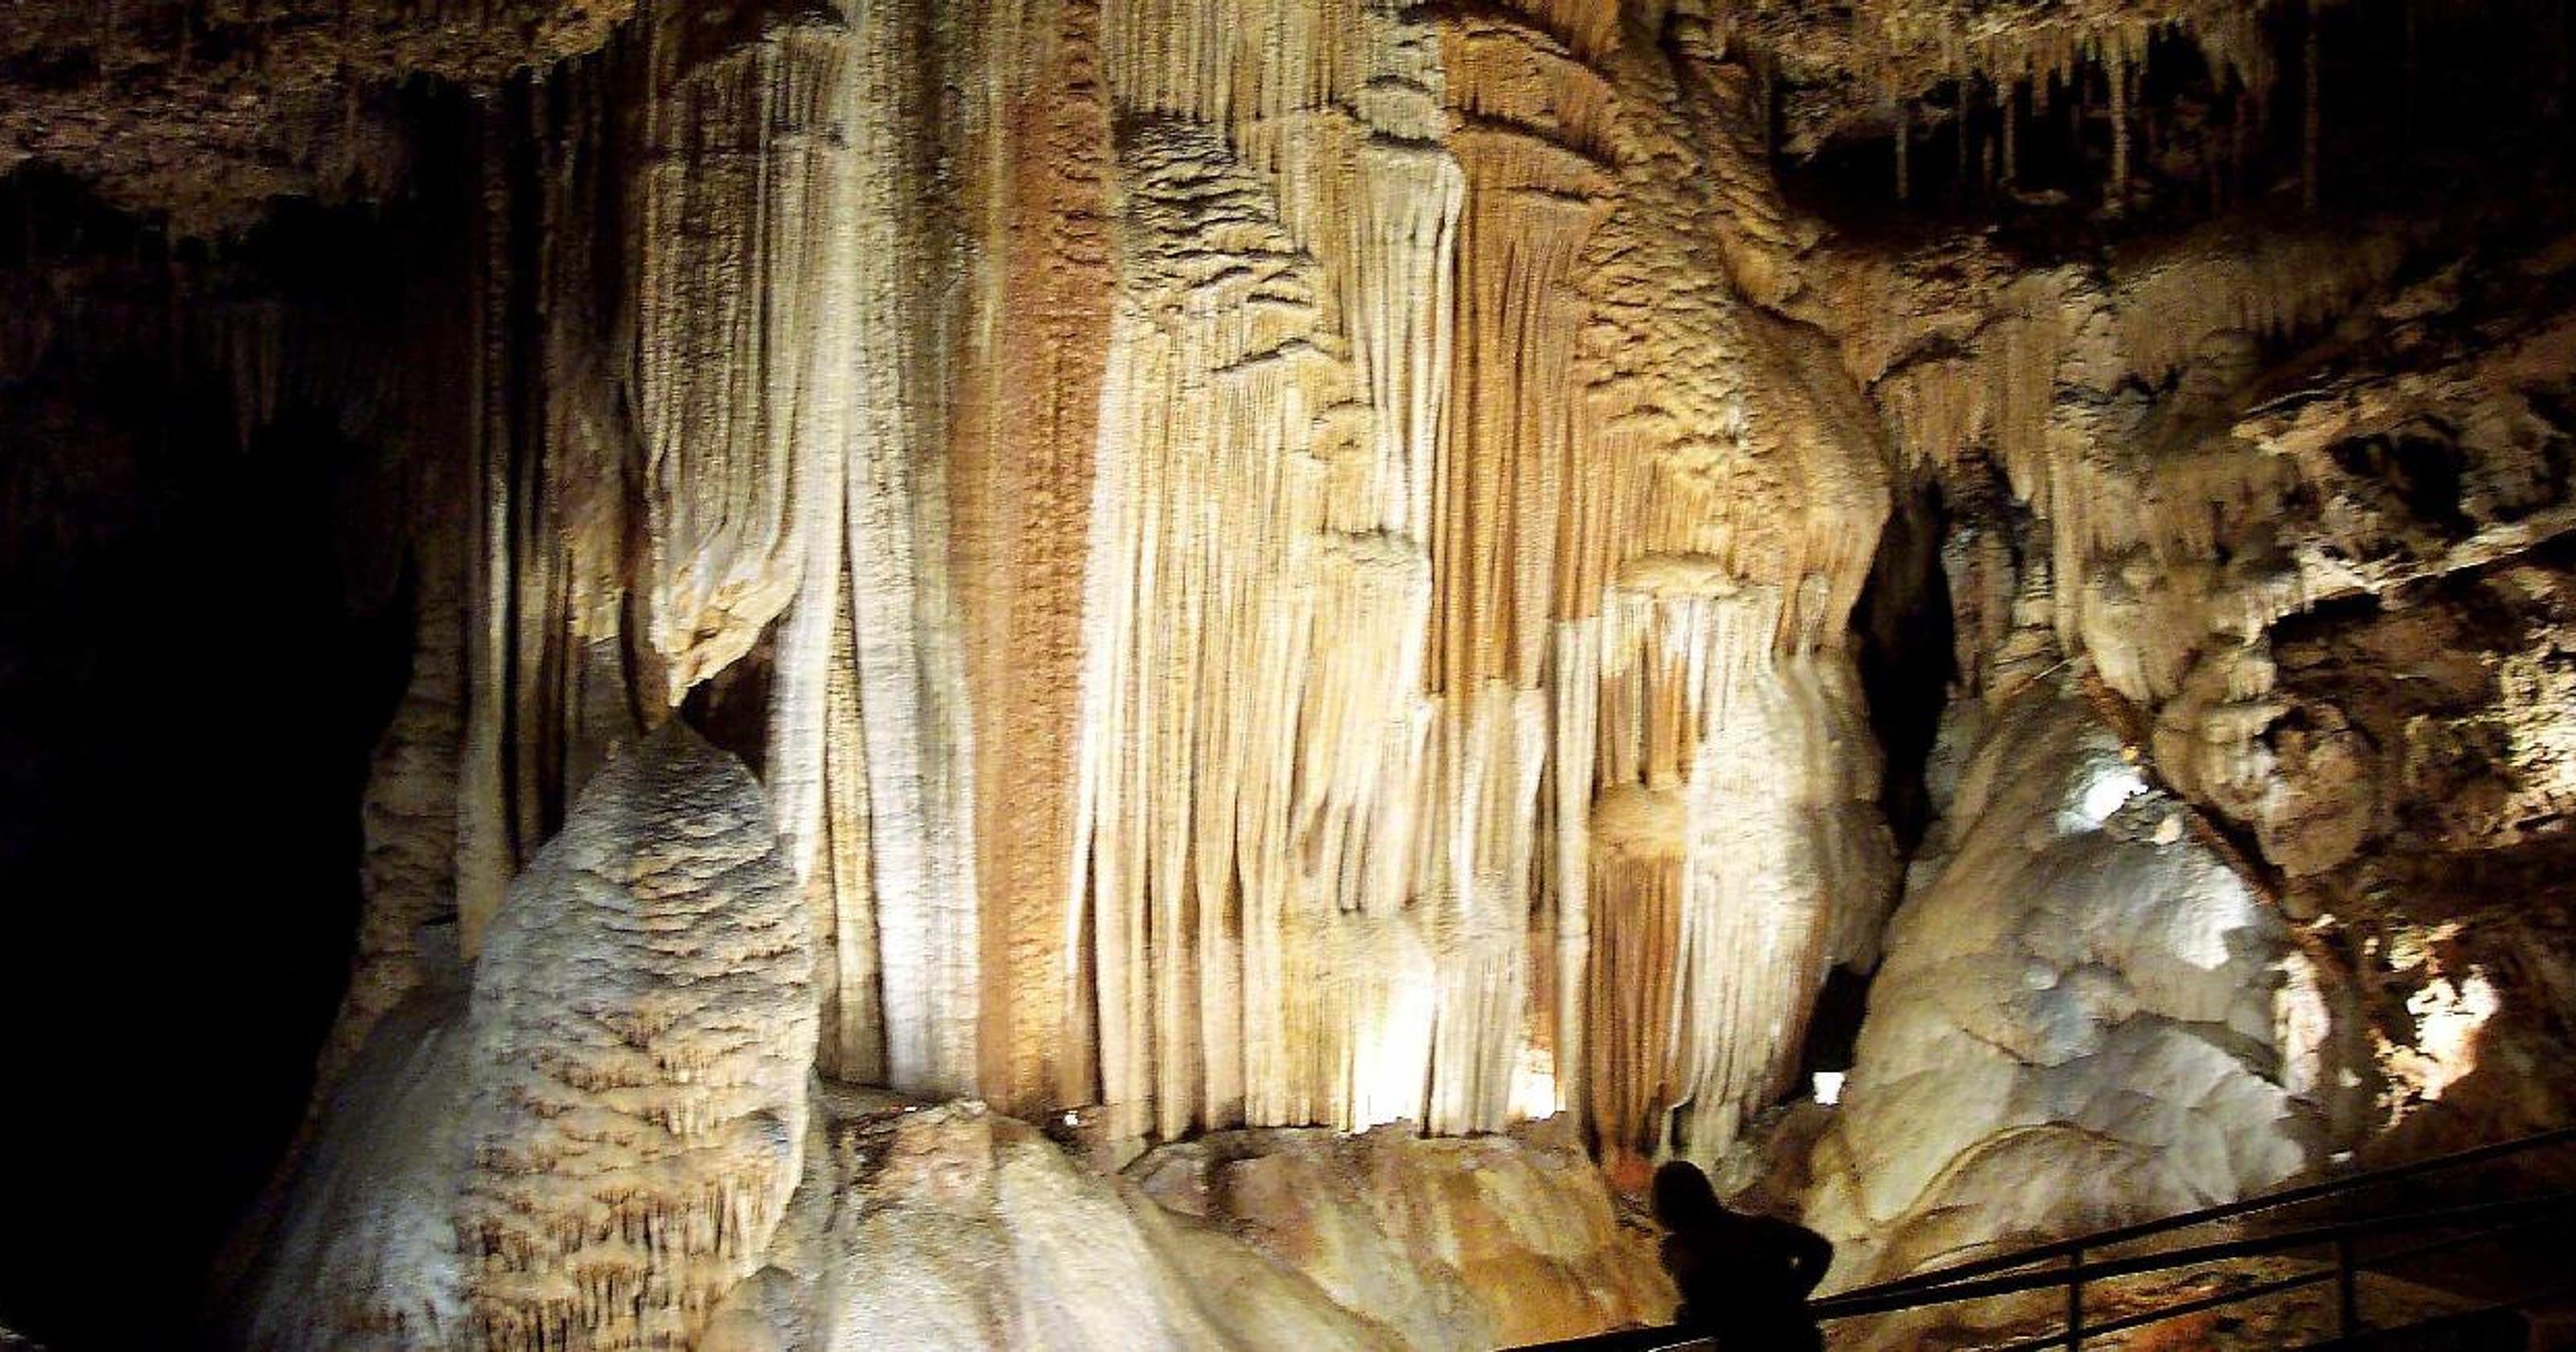 Meramec Caverns tours on hold due to health concerns